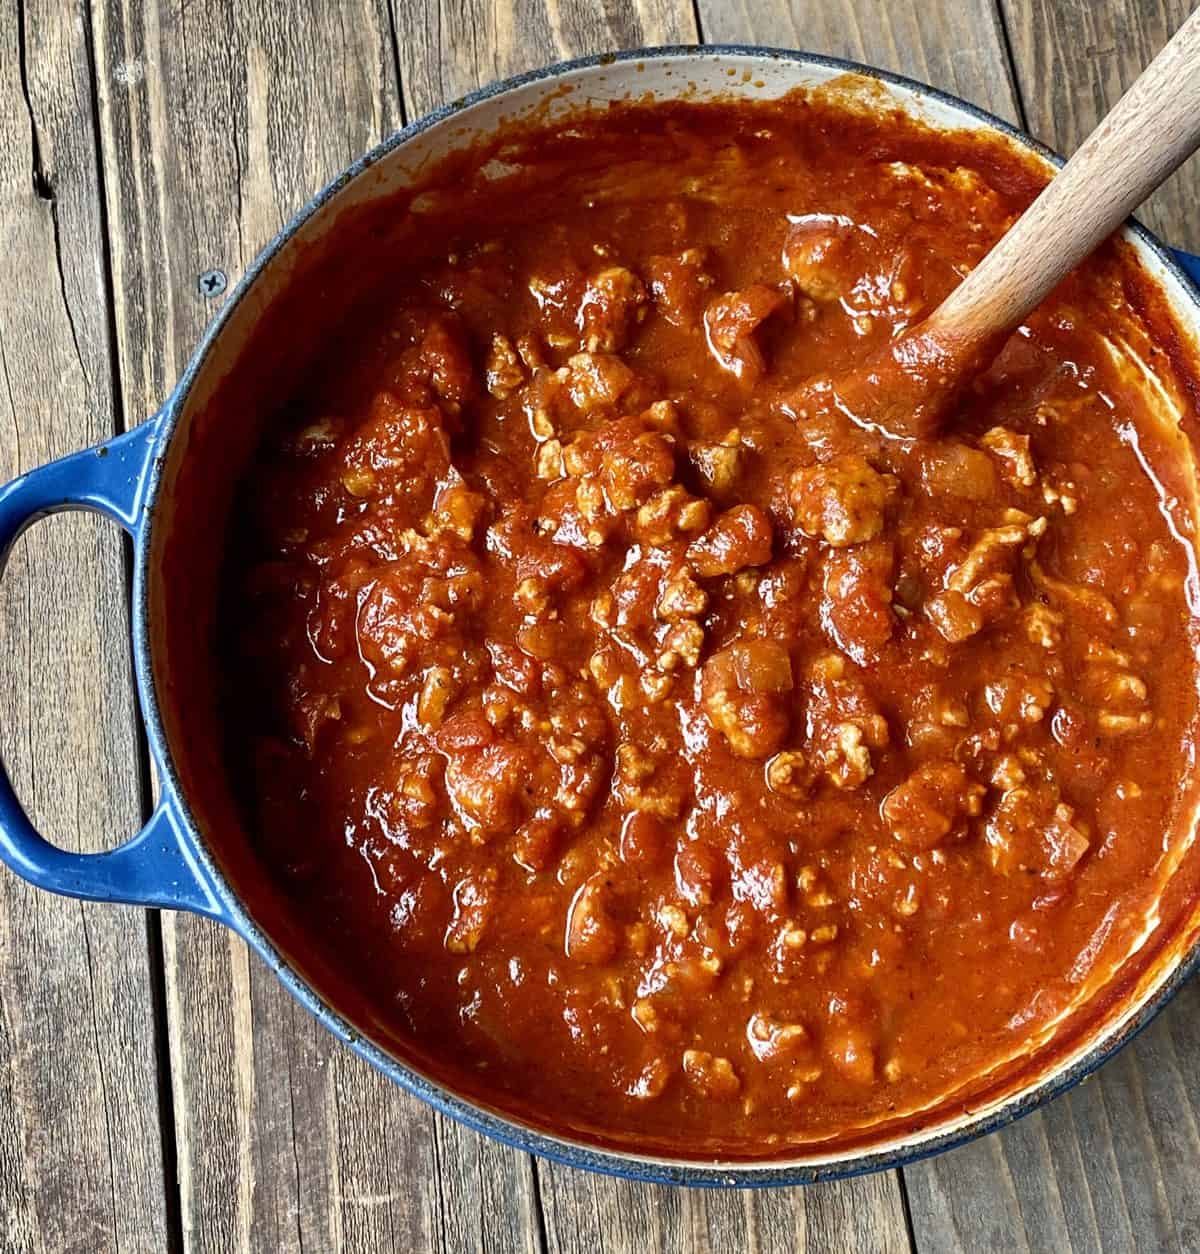 Turkey bolognese sauce in a blue pot on a wooden table